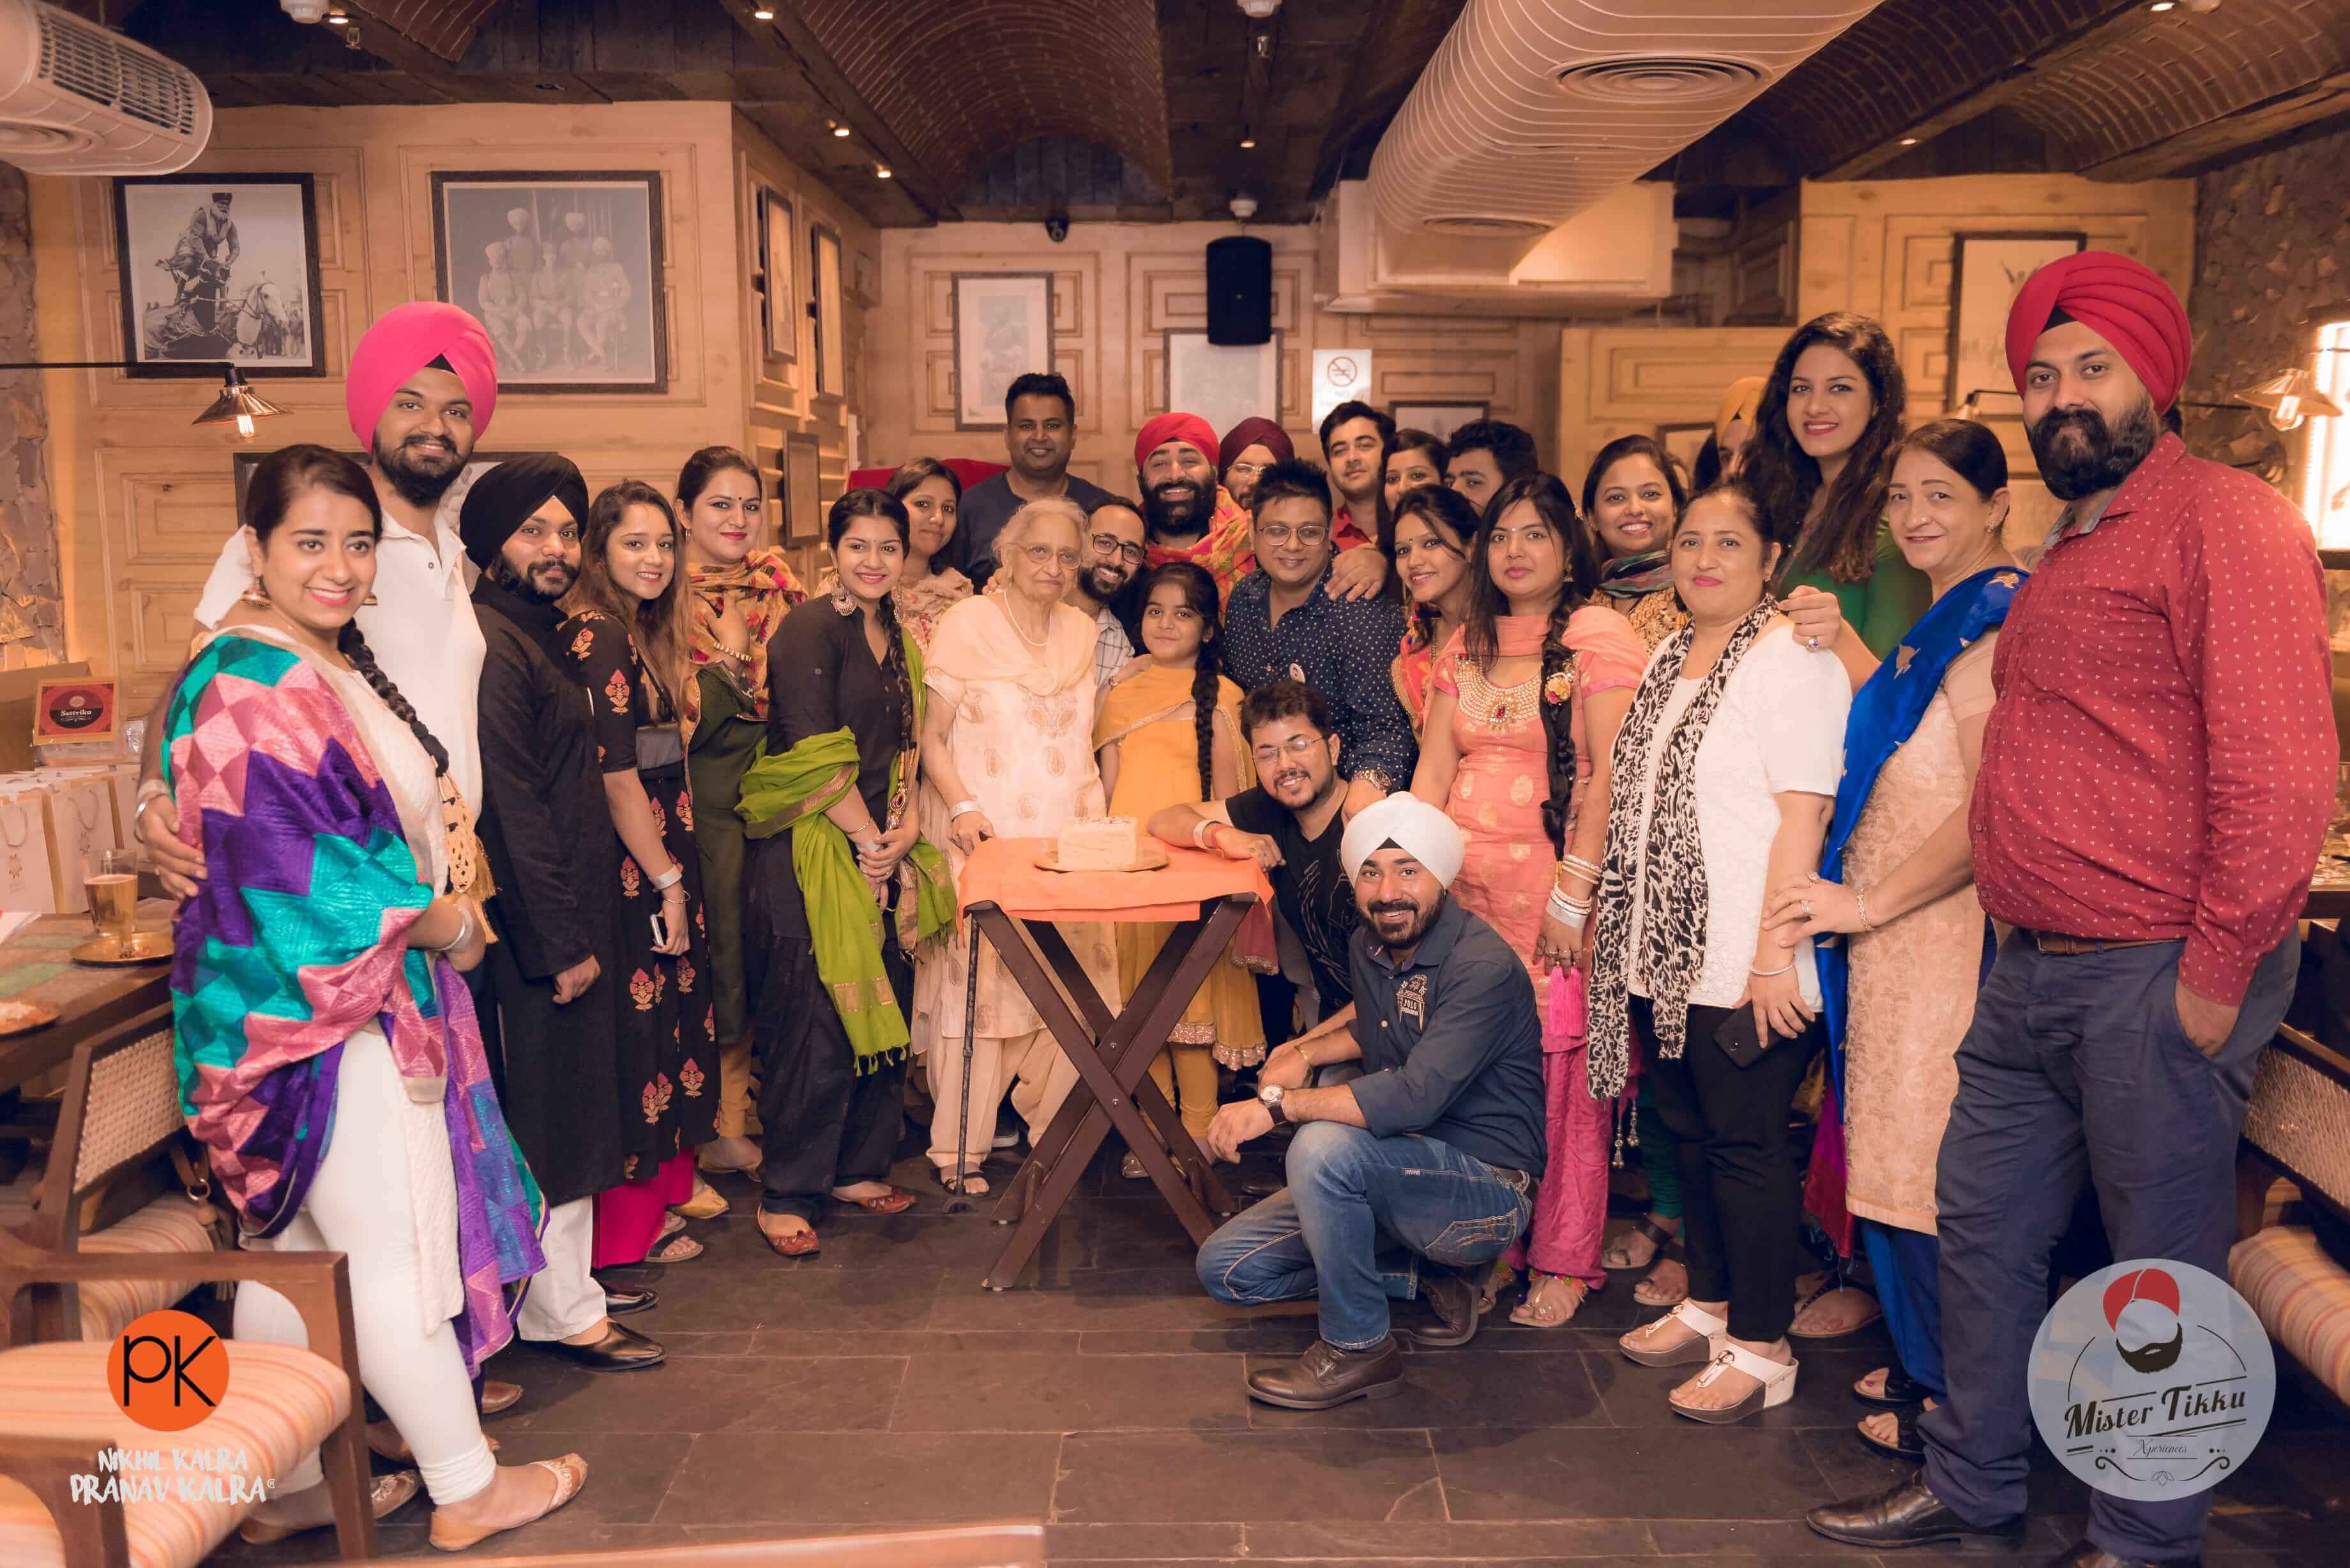 lunch event at ikk panjab by mister tikku